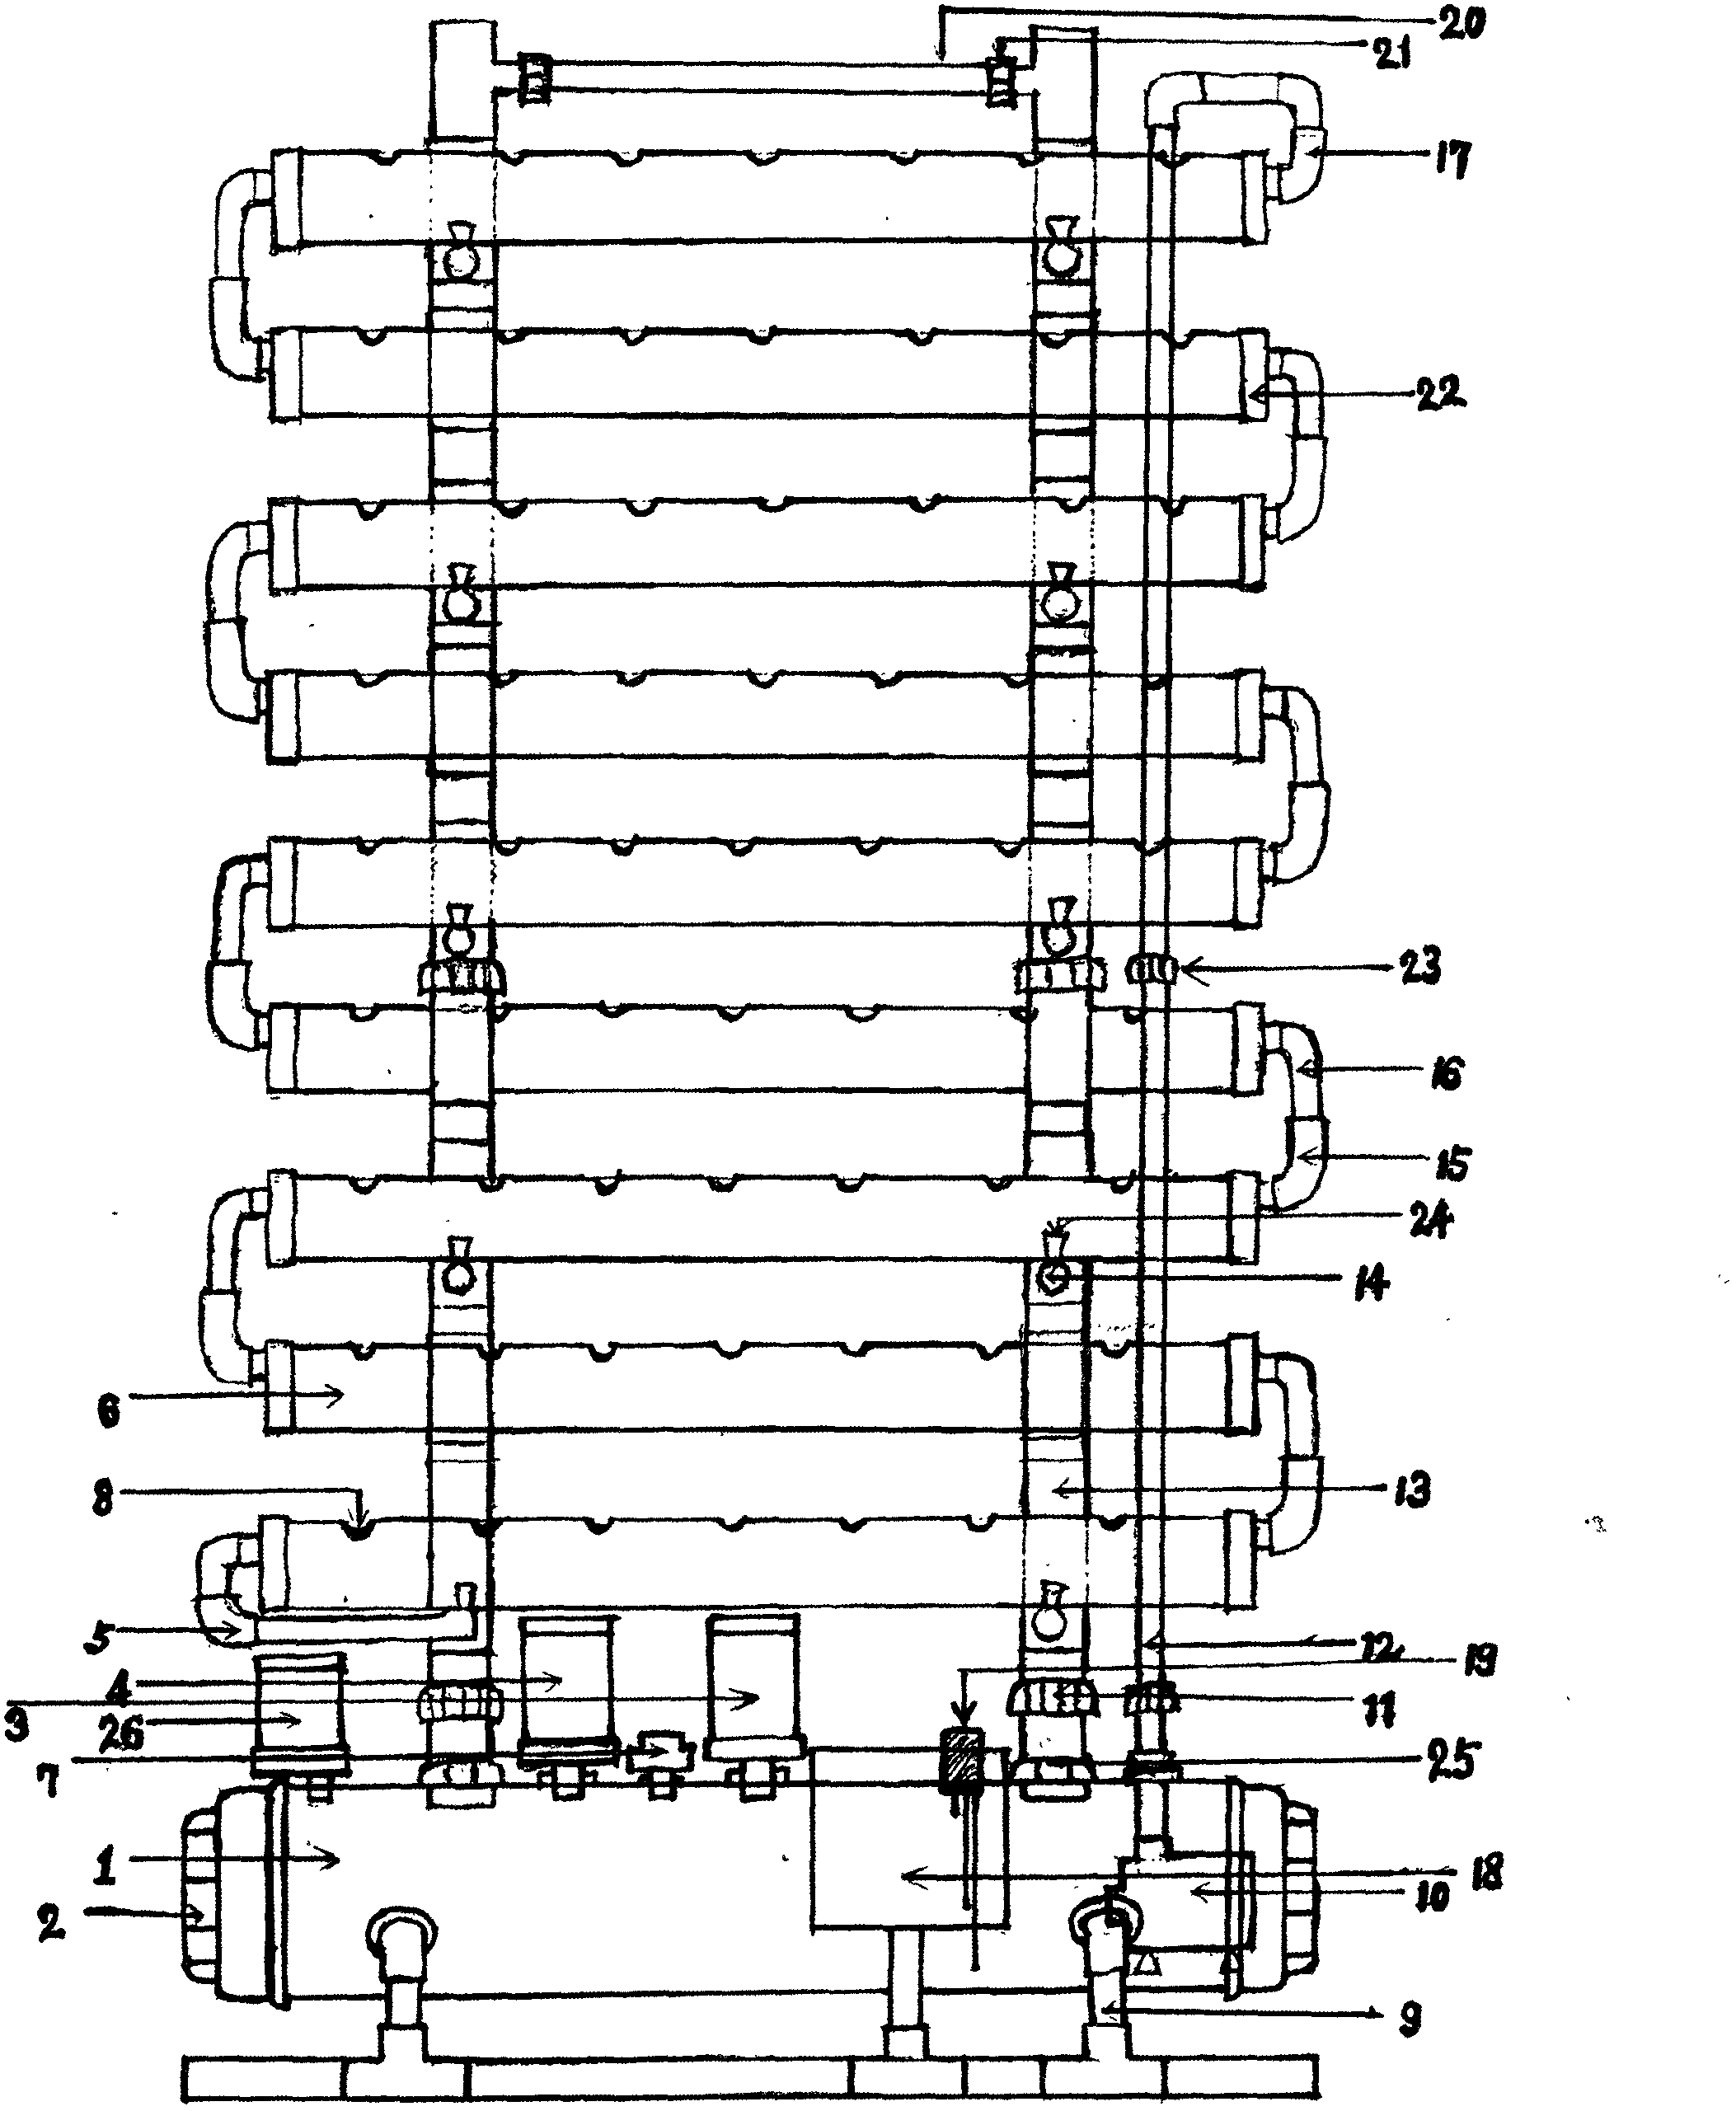 Three-dimensional pipeline intelligent control soilless culture system